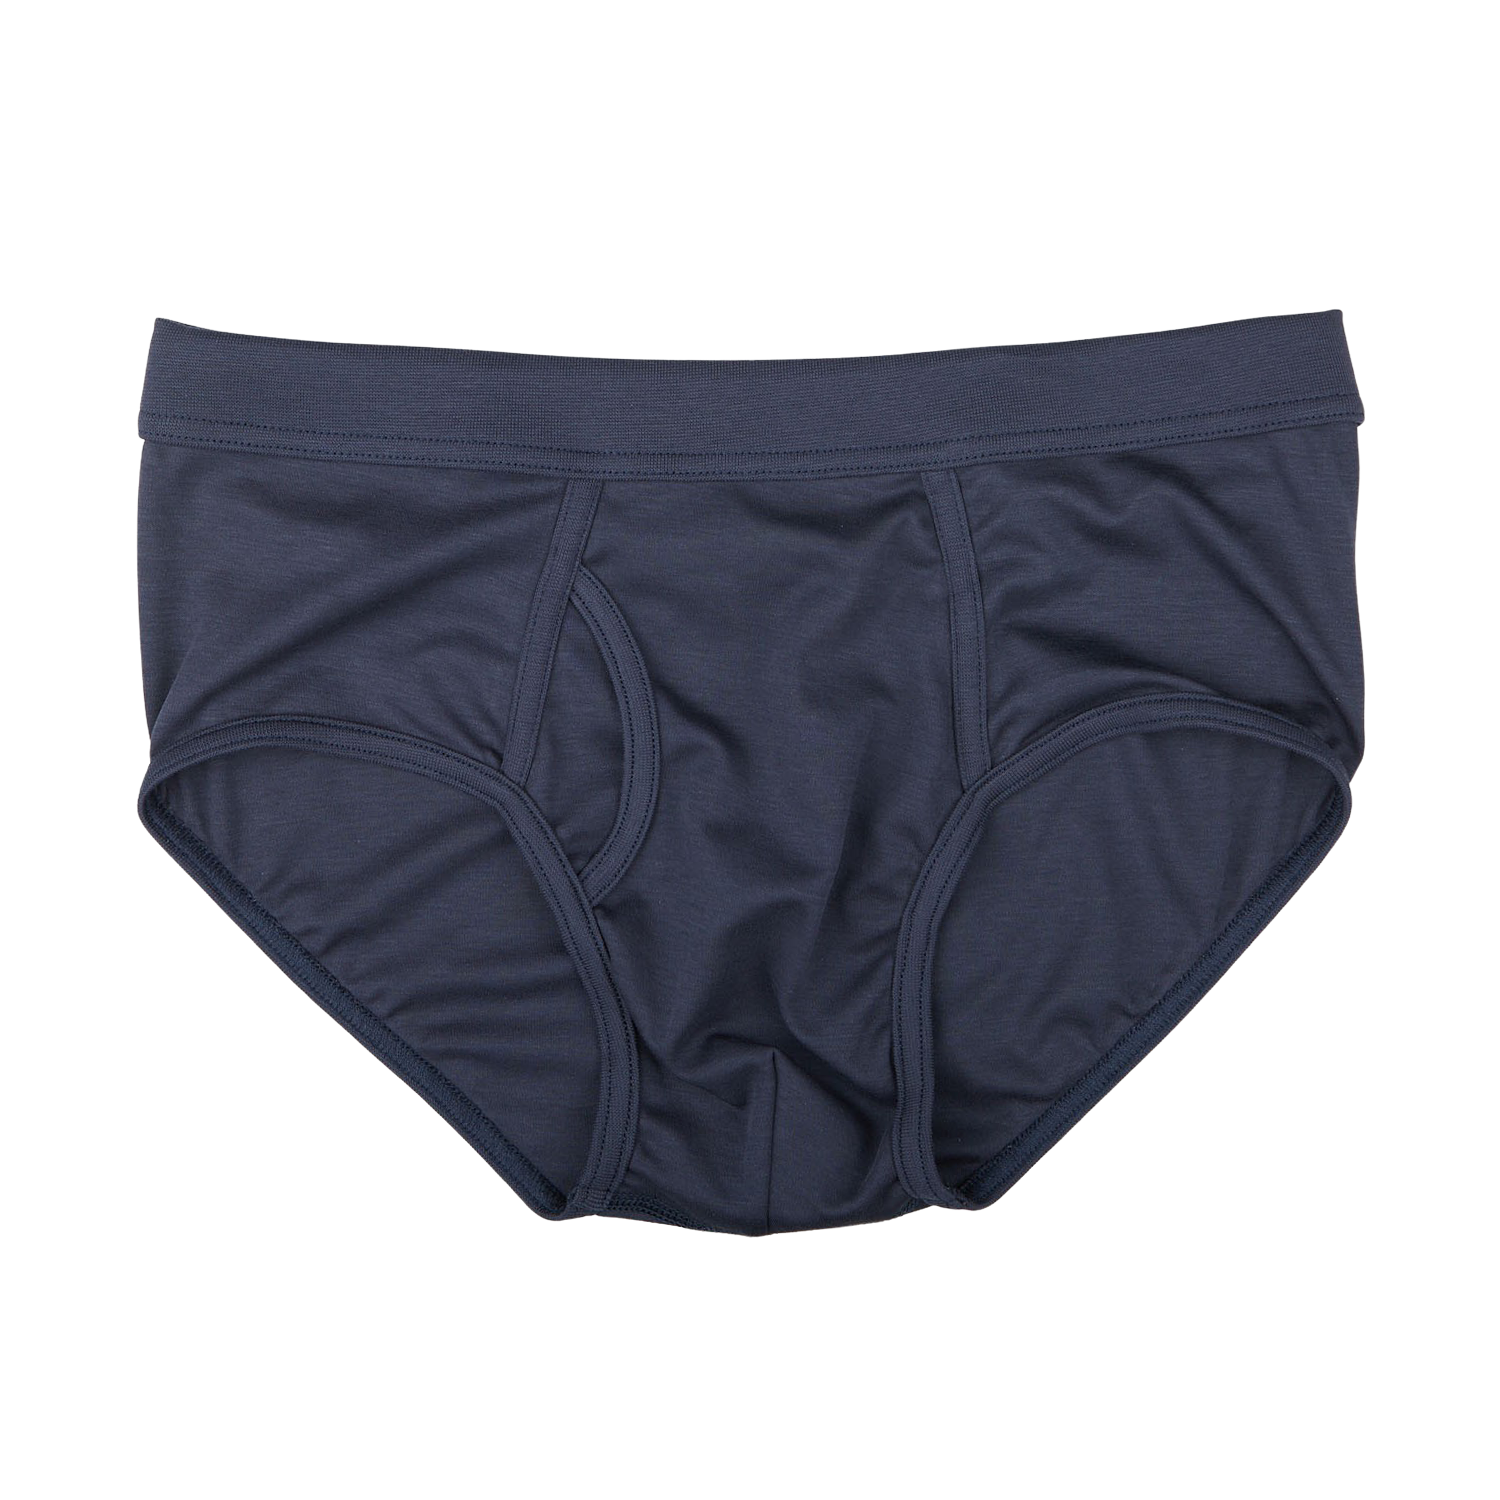 A pair of Parisian Night Pima Cotton Platan Briefs by The White Briefs, crafted from luxurious organic pima cotton with a front fly, displayed on a plain white background, evoking the elegance of a Parisian night.